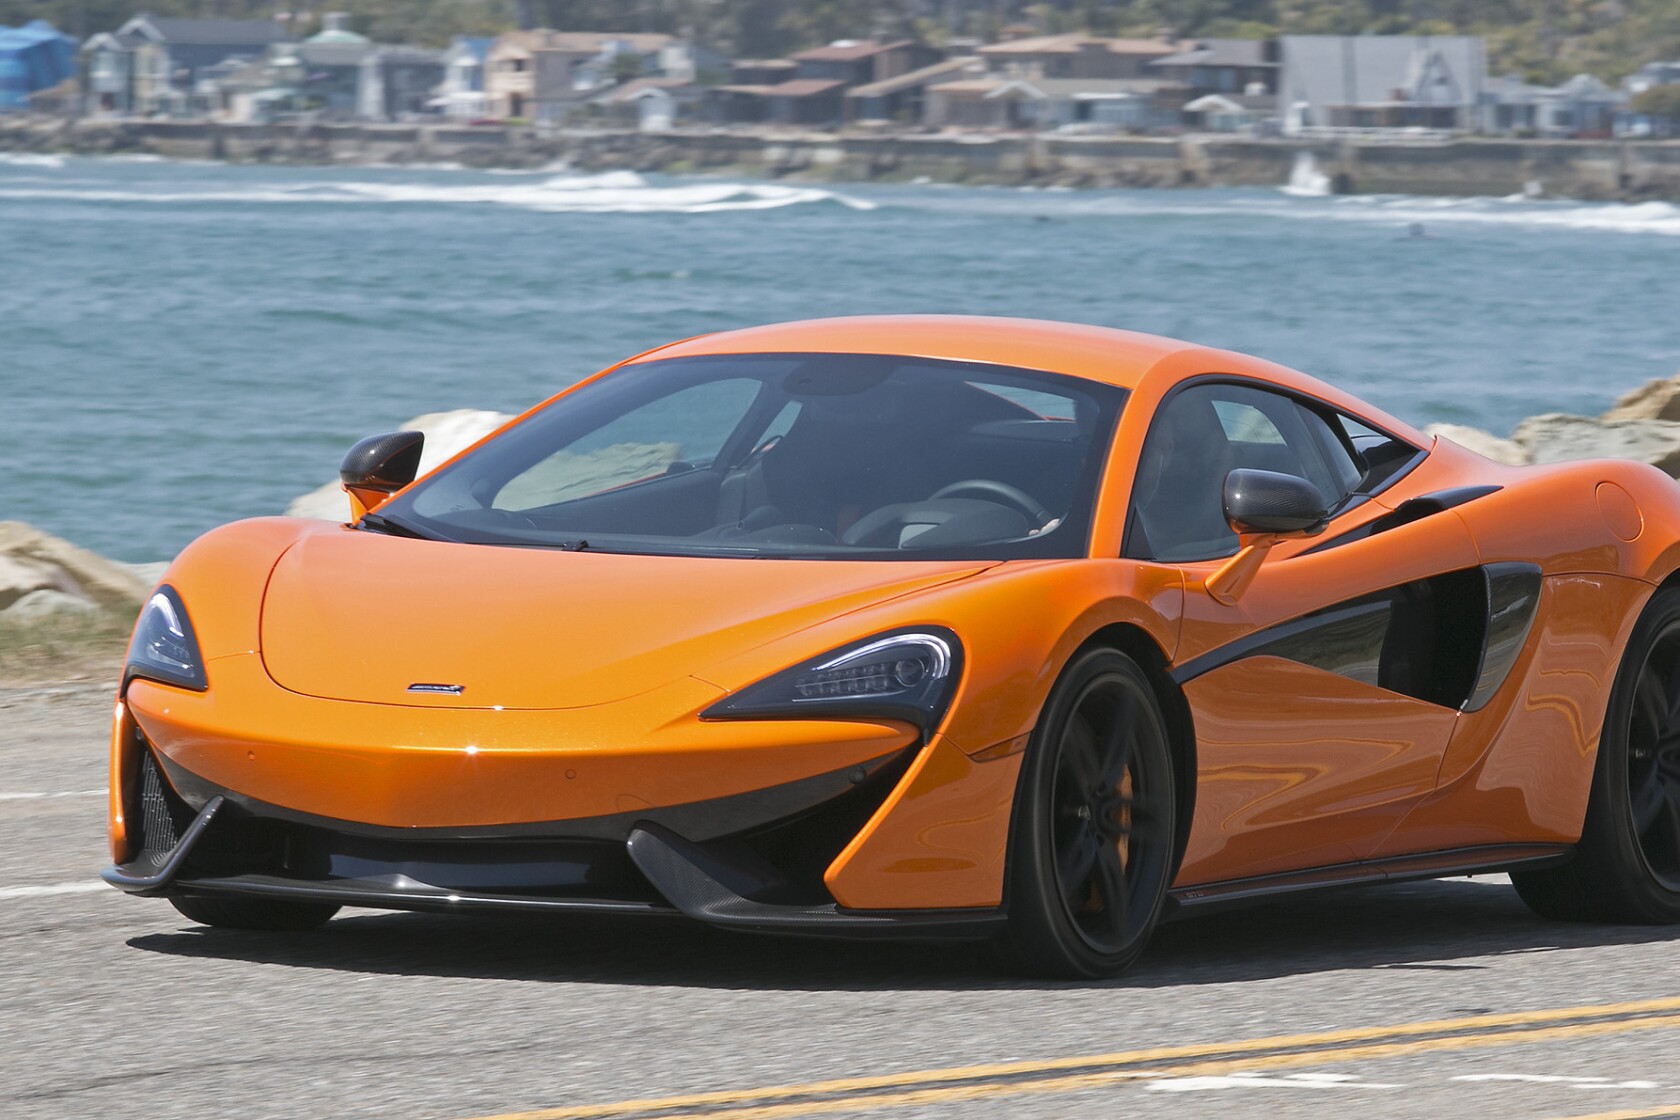 Mclaren Builds A Car For The Masses With A 200 000 Price